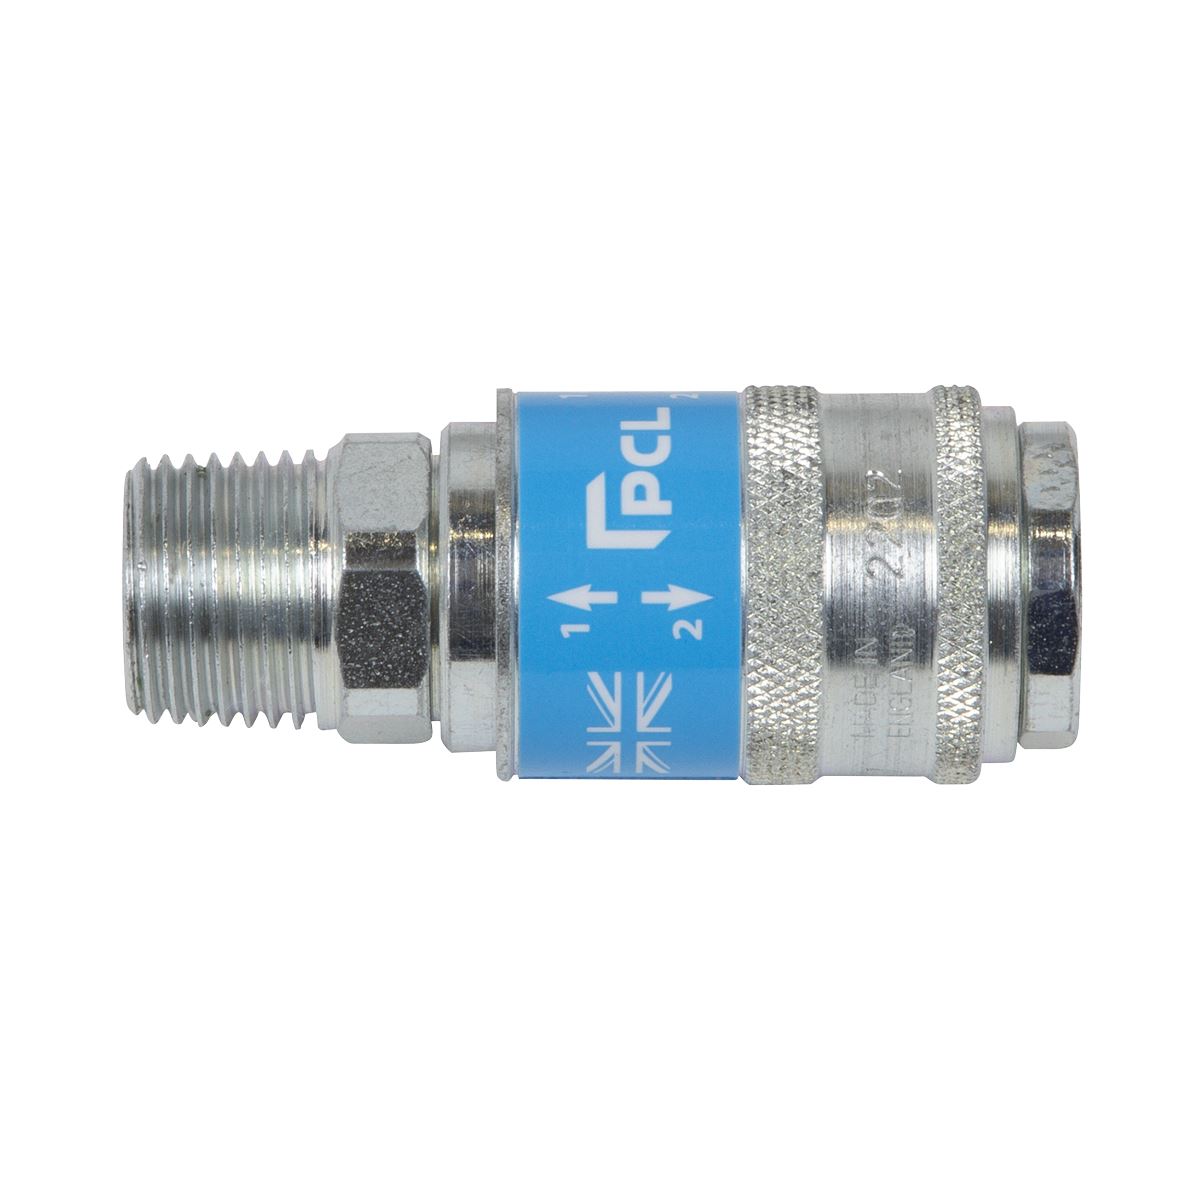 PCL Safeflow Safety Coupling Body Male 1/2"BSPT